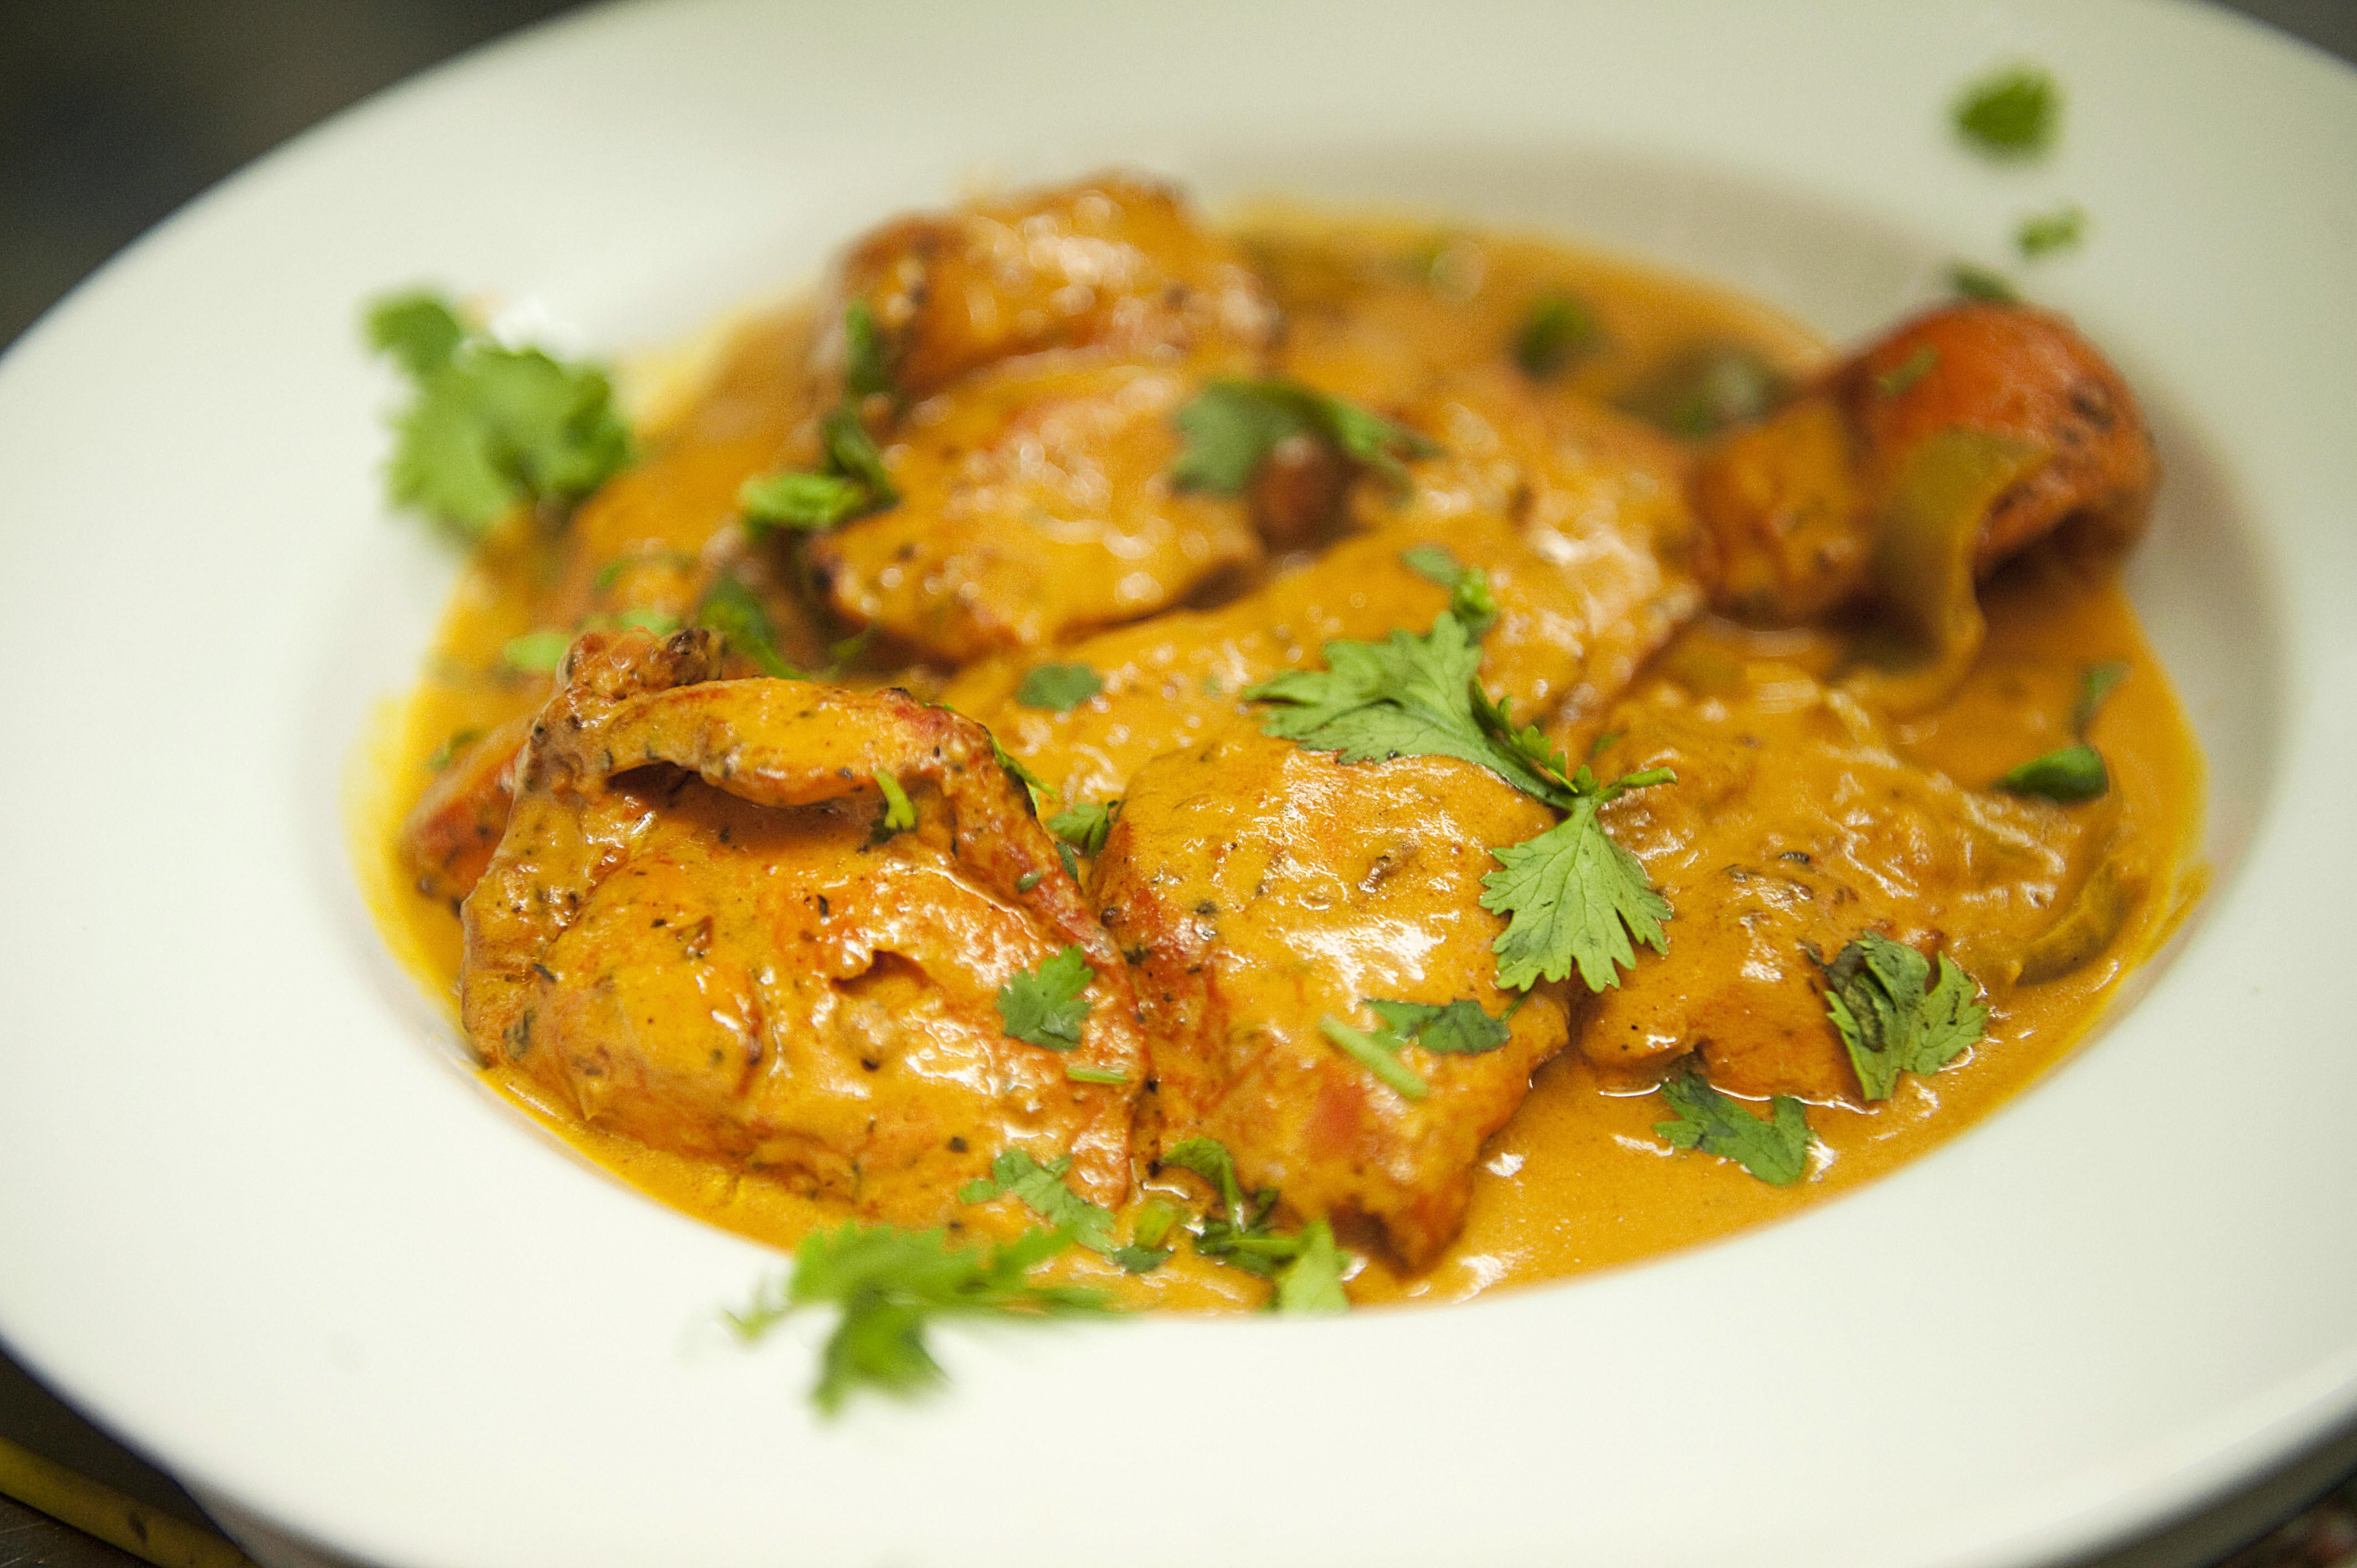 A plate of chicken tikka masala pictured at Glasgow’s Shish Mahal restaurant